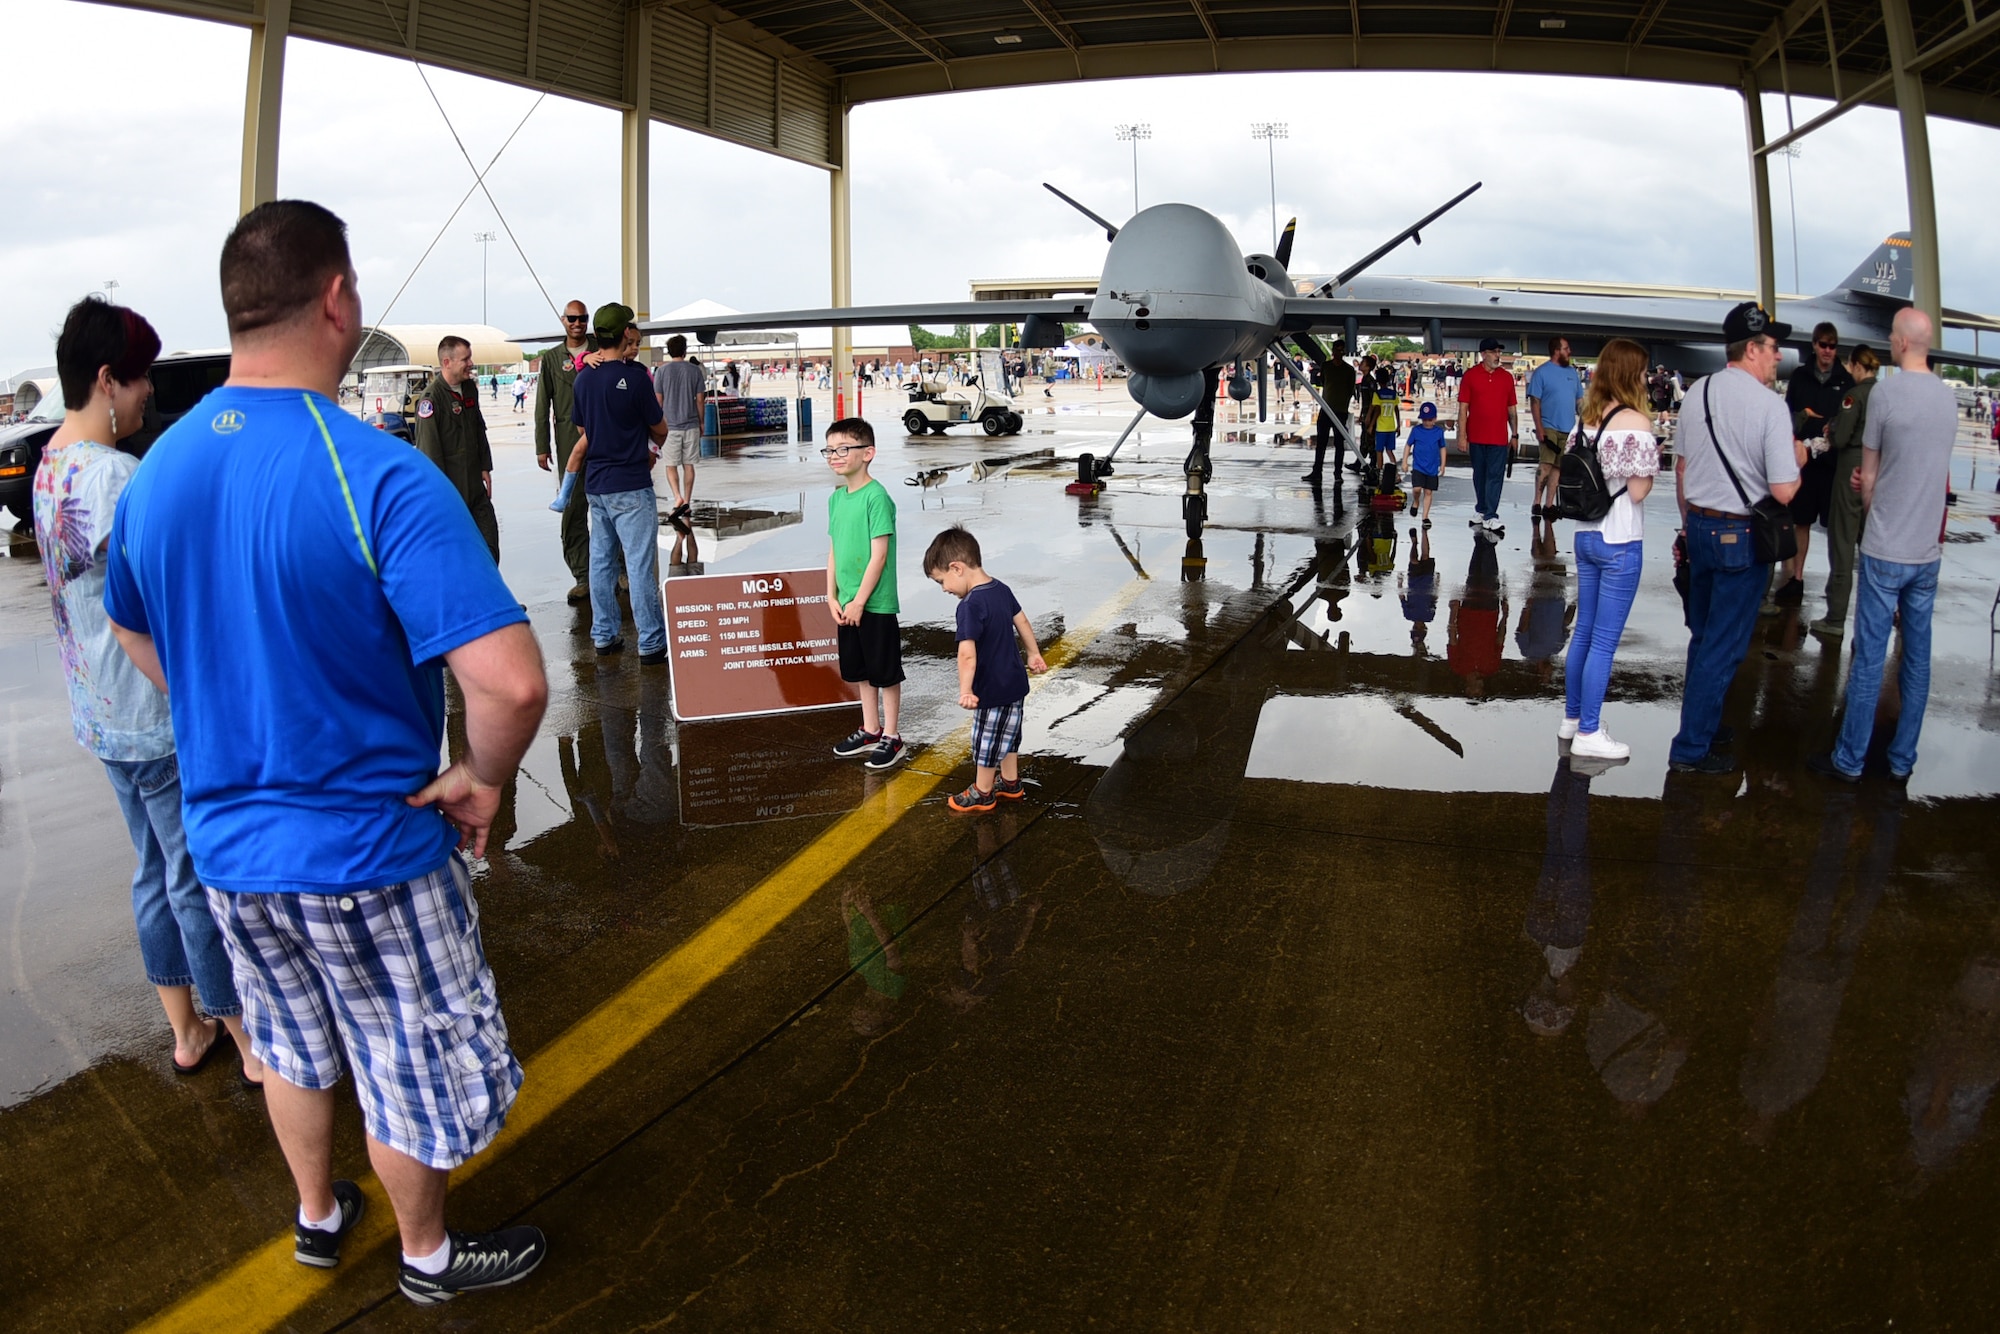 Airpower Over Hampton Roads spectators check out the MQ-9 Reaper at Joint Base Langley-Eustis, Virginia, May 20, 2018. Cloudy skies and rain did not deter visitors from paying a visit to JBLE over the air show weekend. (U.S. Air Force photo by Airman 1st Class Haley Stevens)